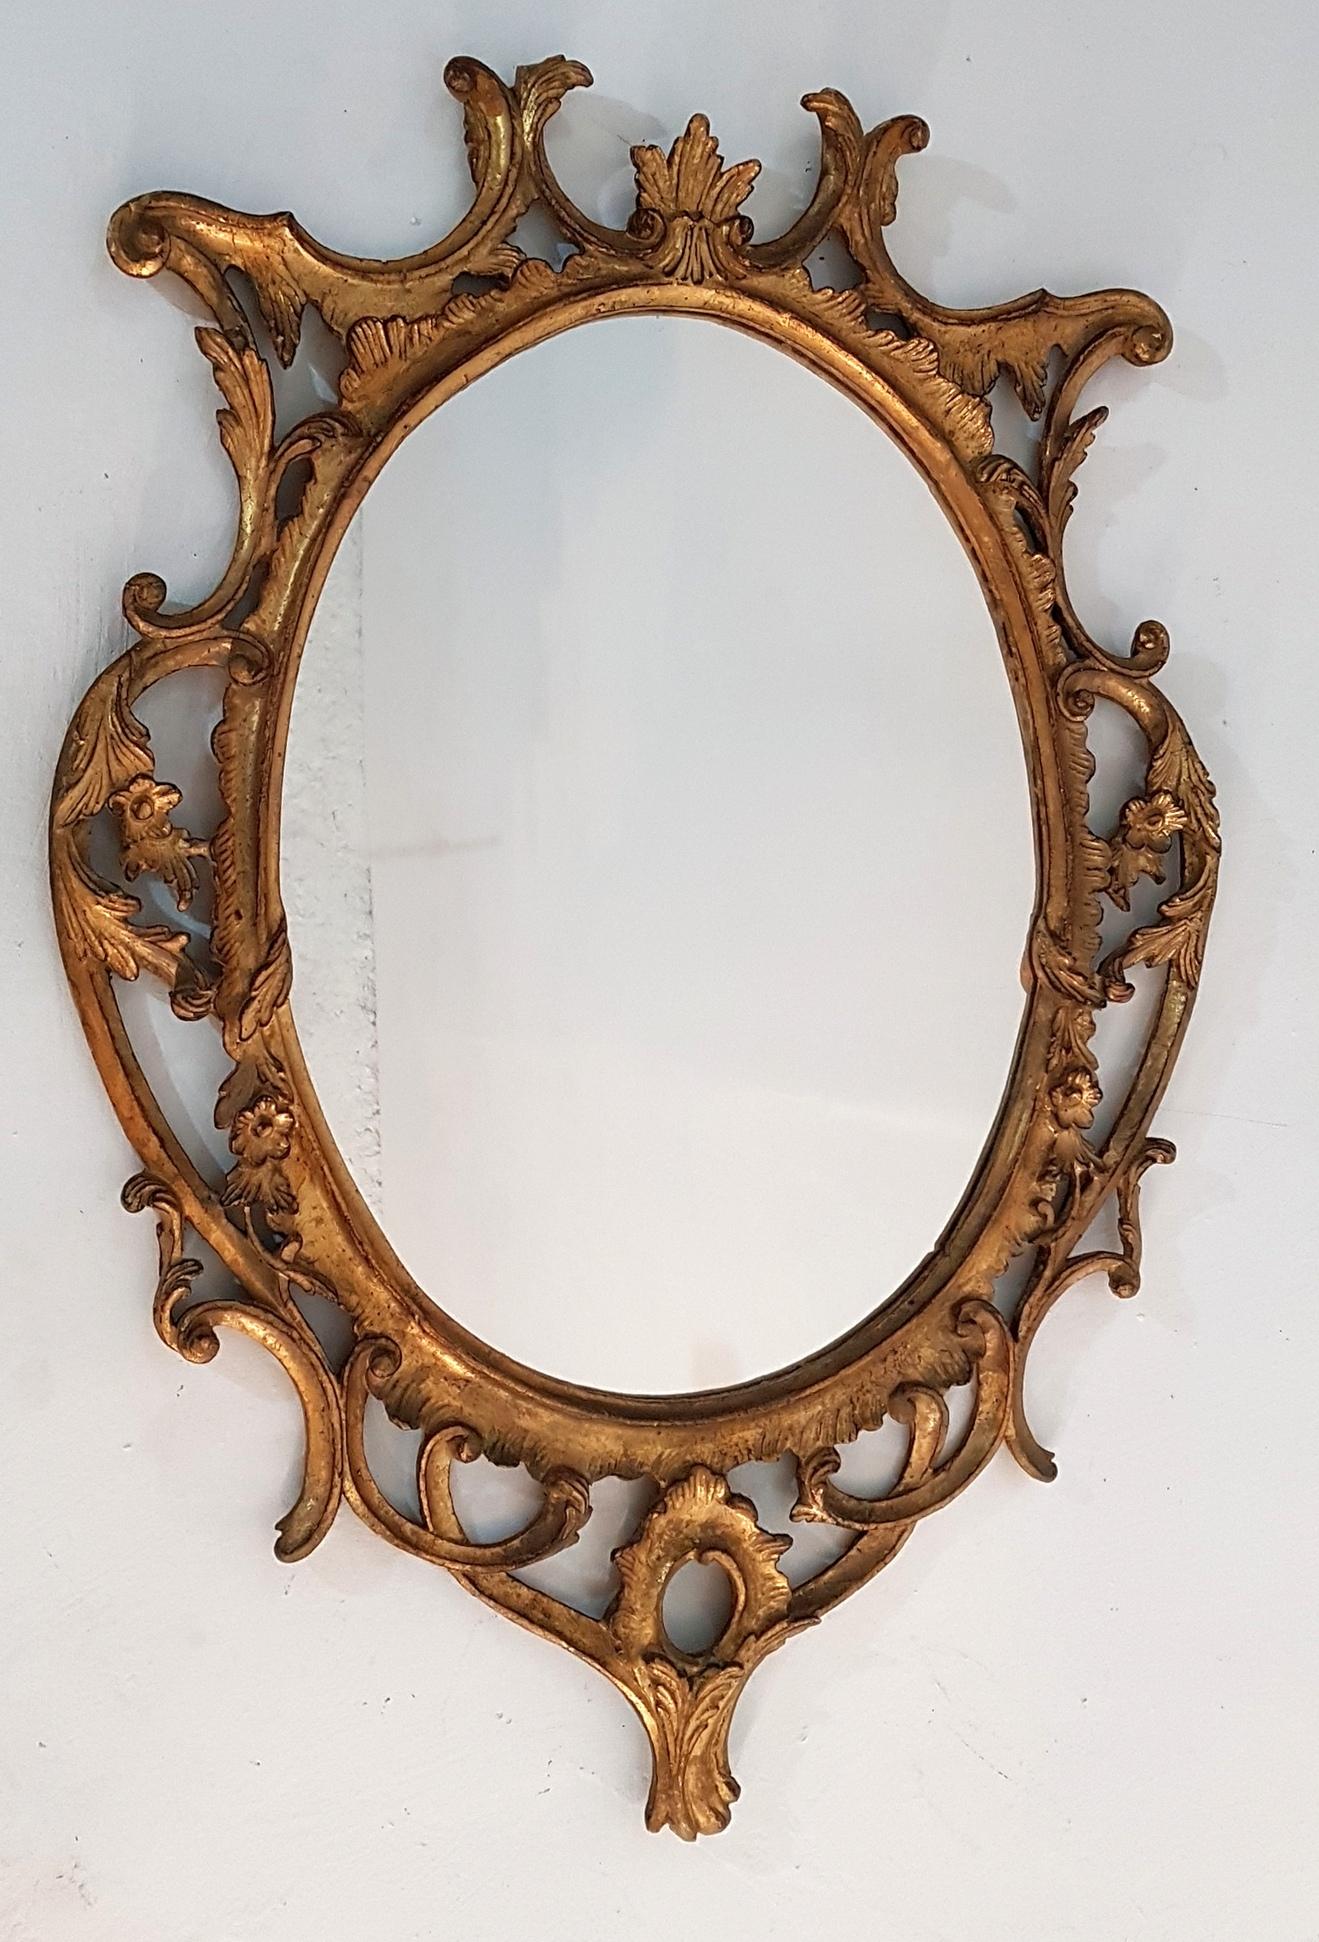 Ornately hand carved Italian Rococo mirror in gilded wood with exquisite form and outstanding craftsmanship.